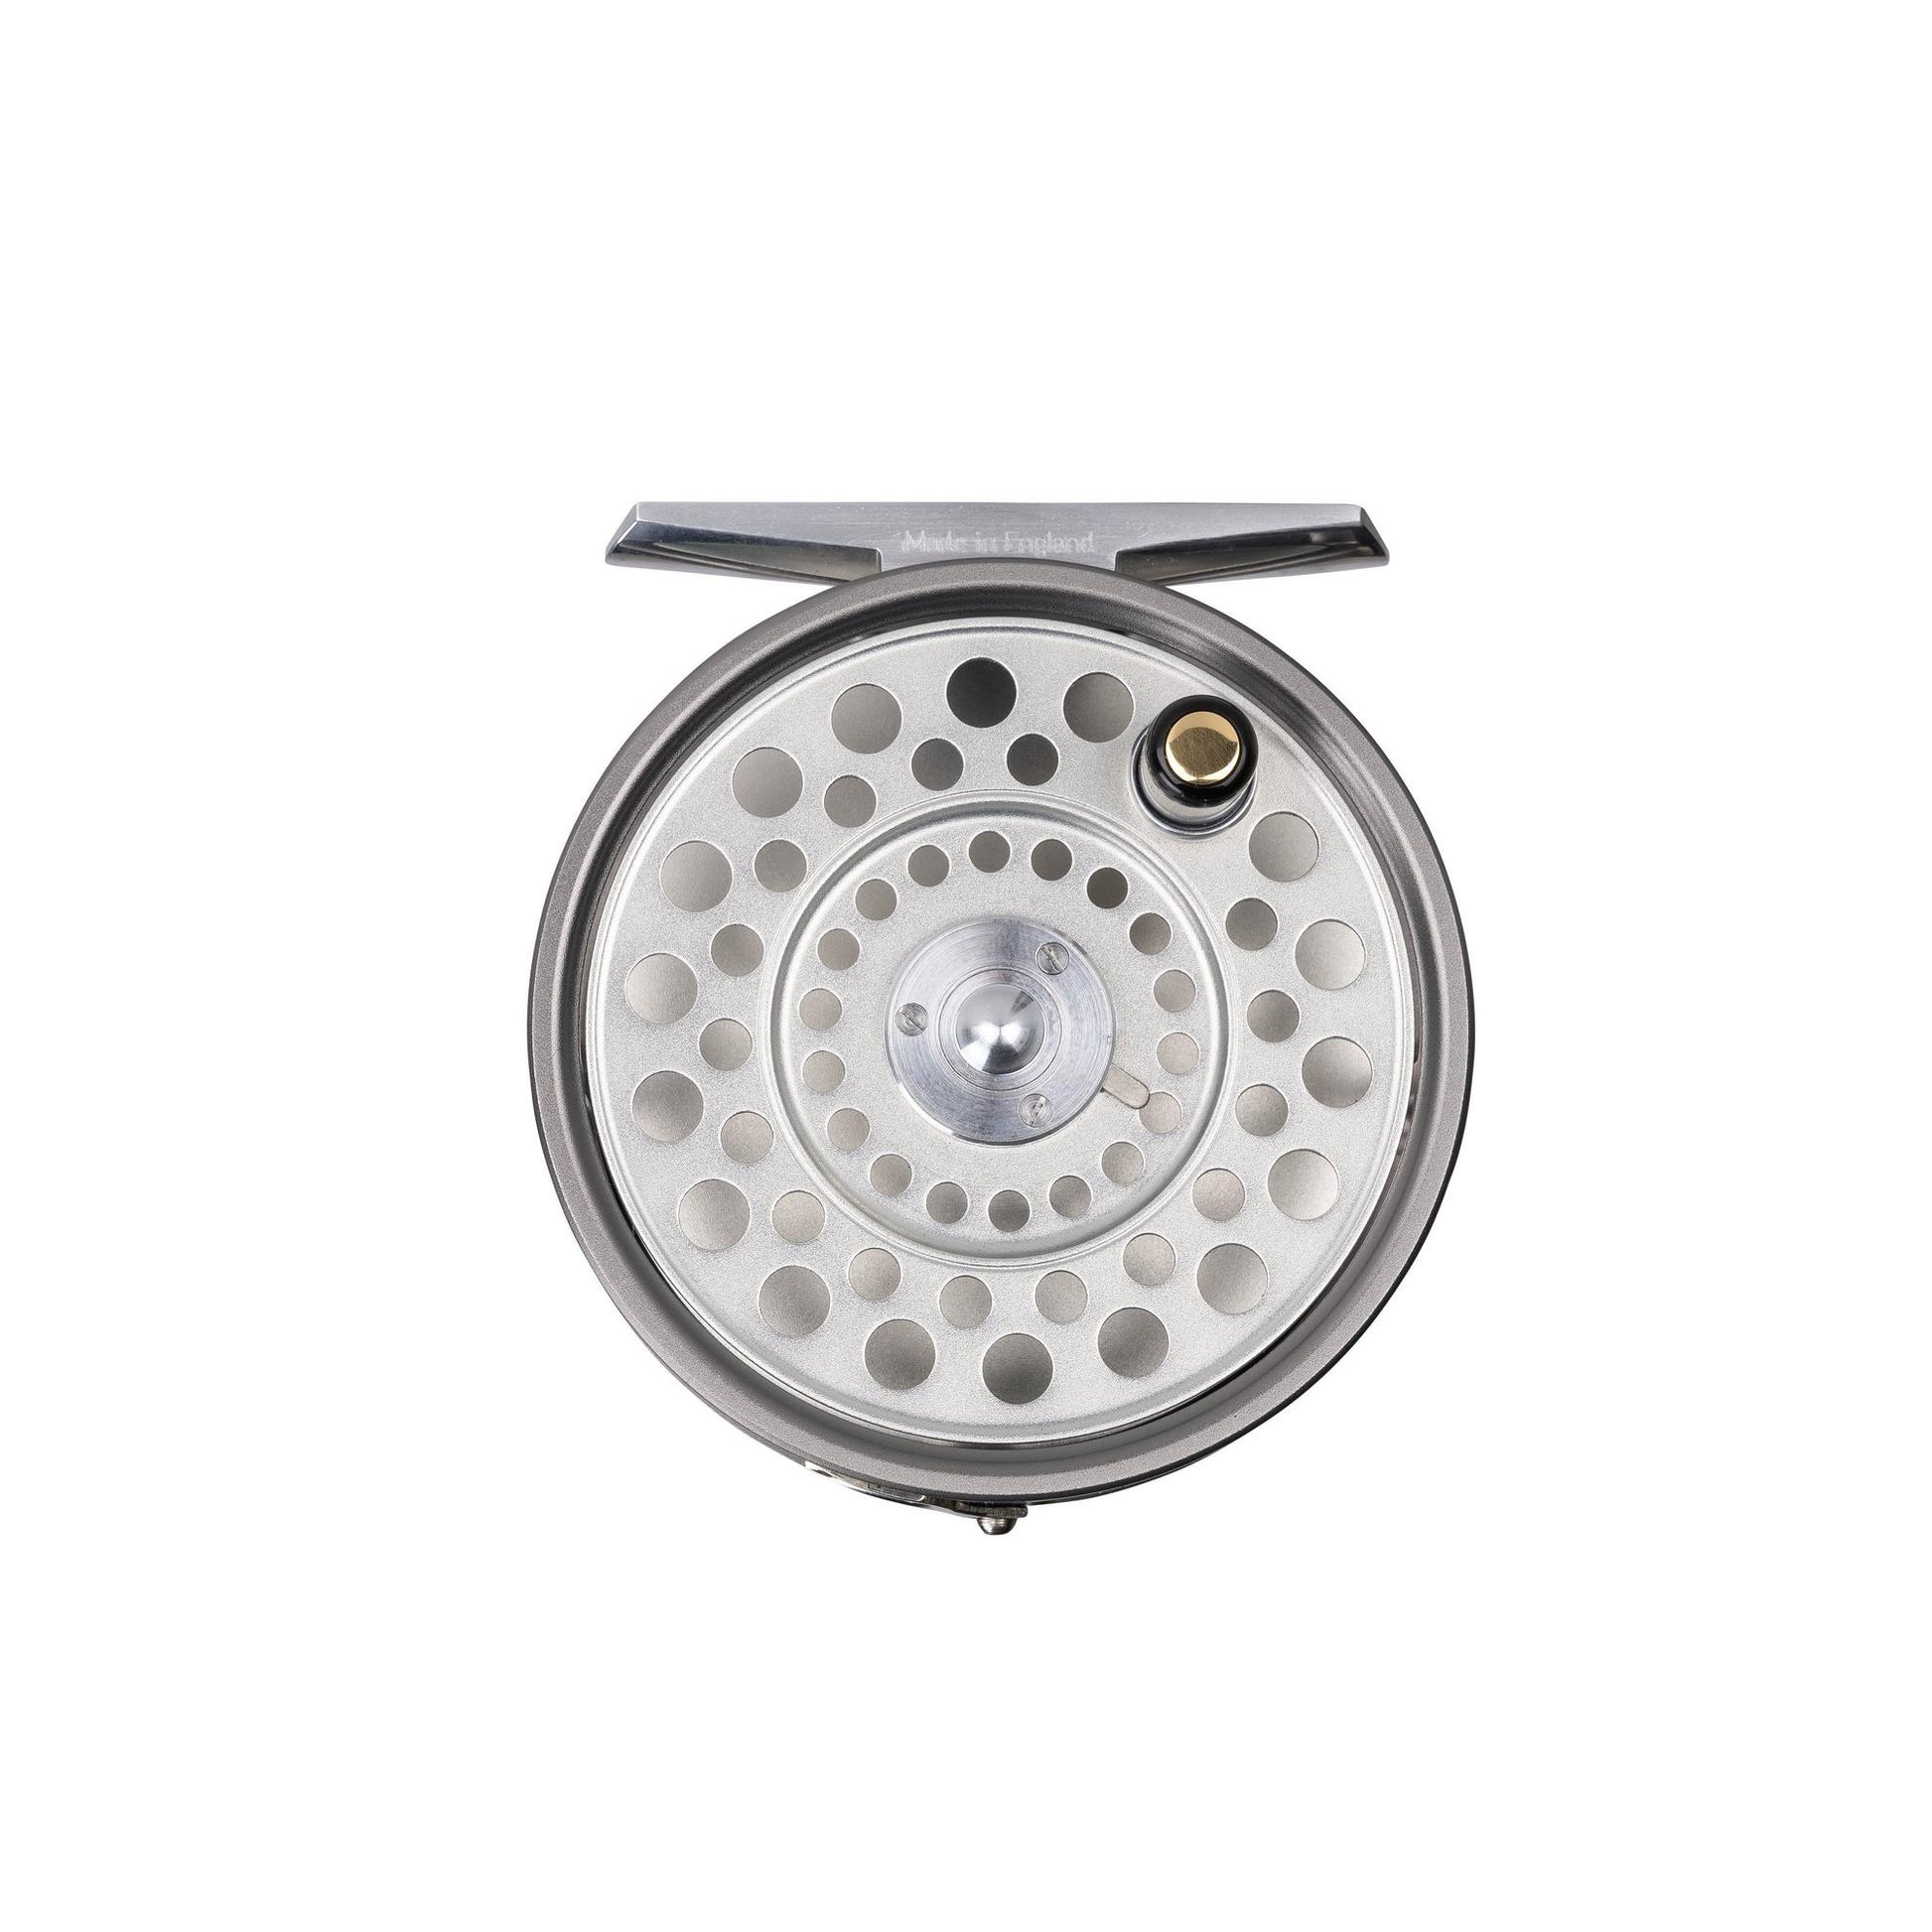 #5/6 reel with 7wt line?